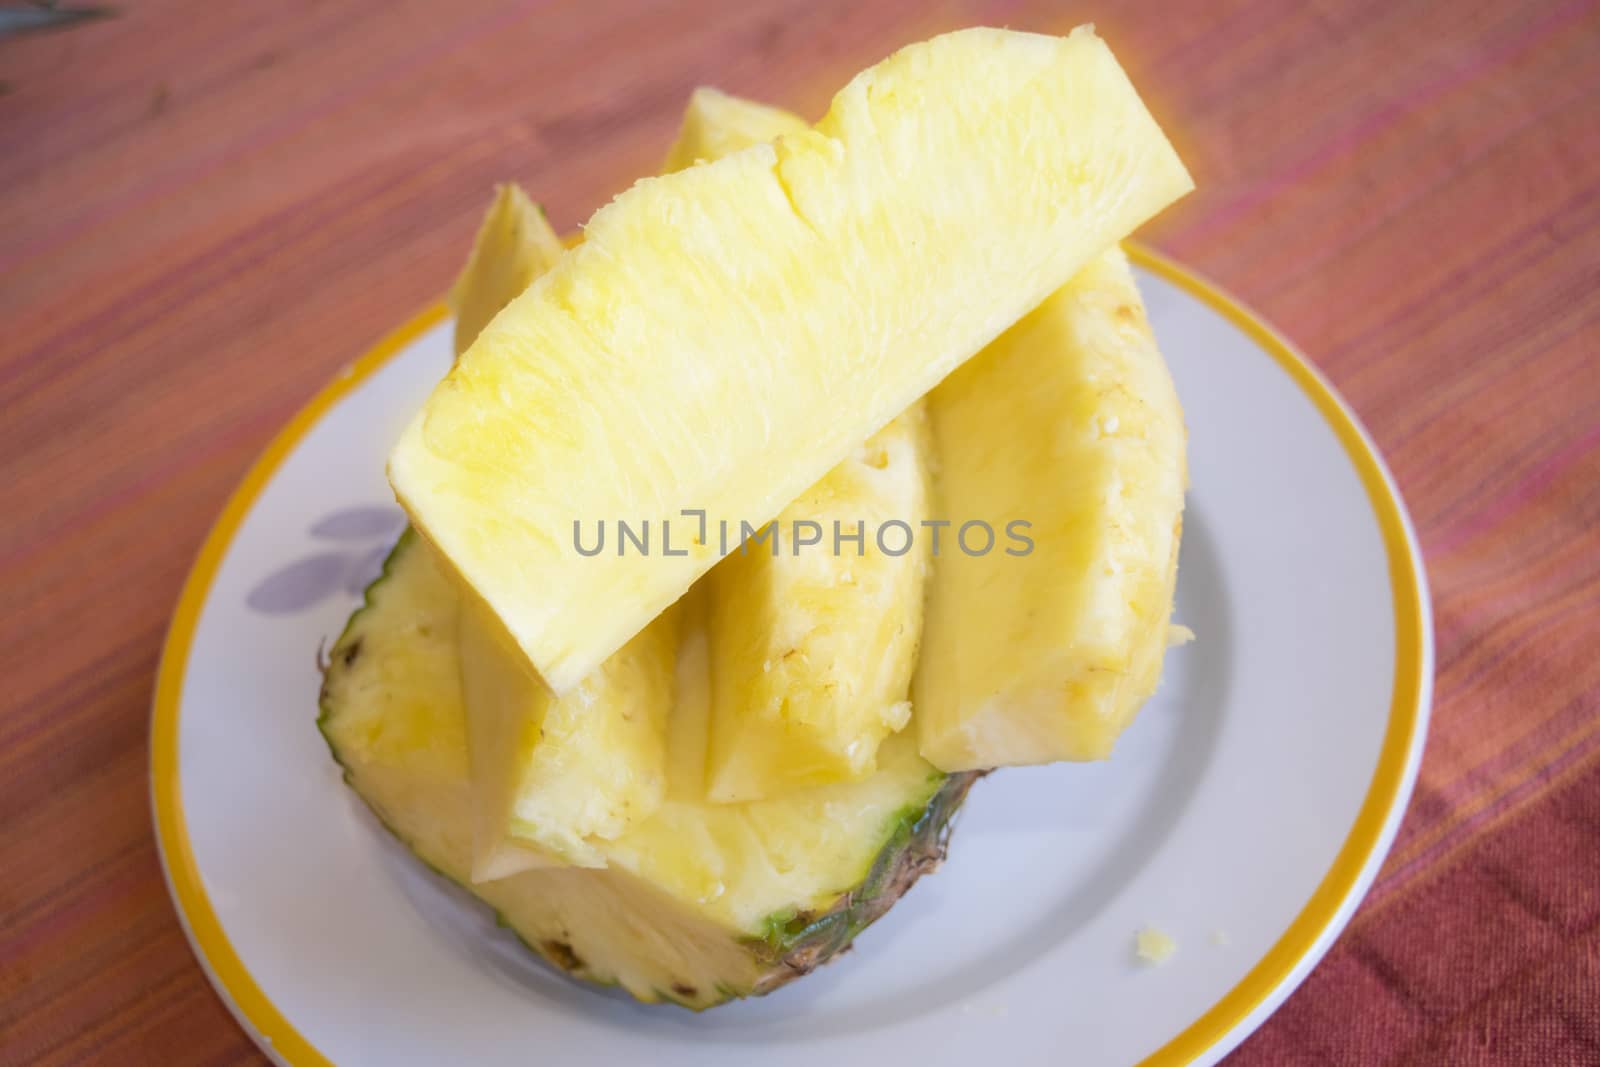 heap of fresh sliced pineapples in a white dish